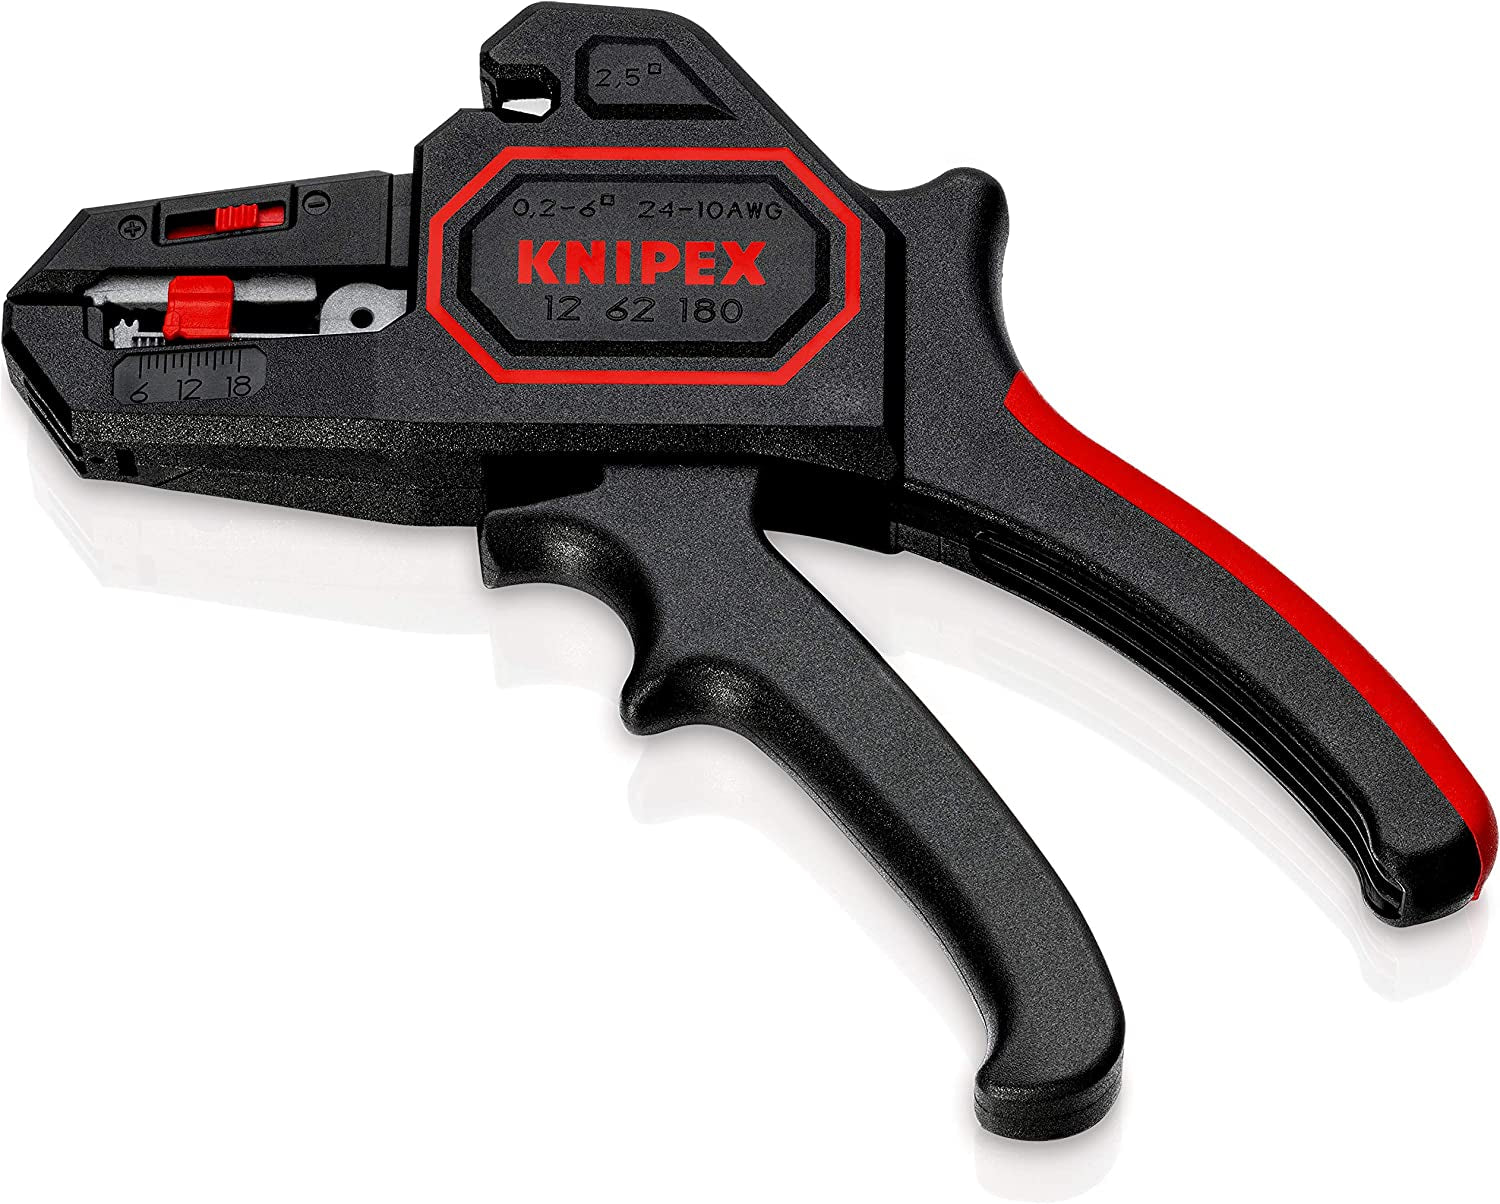 KNIPEX, KNIPEX Automatic Insulation Stripper (180 Mm) 12 62 180